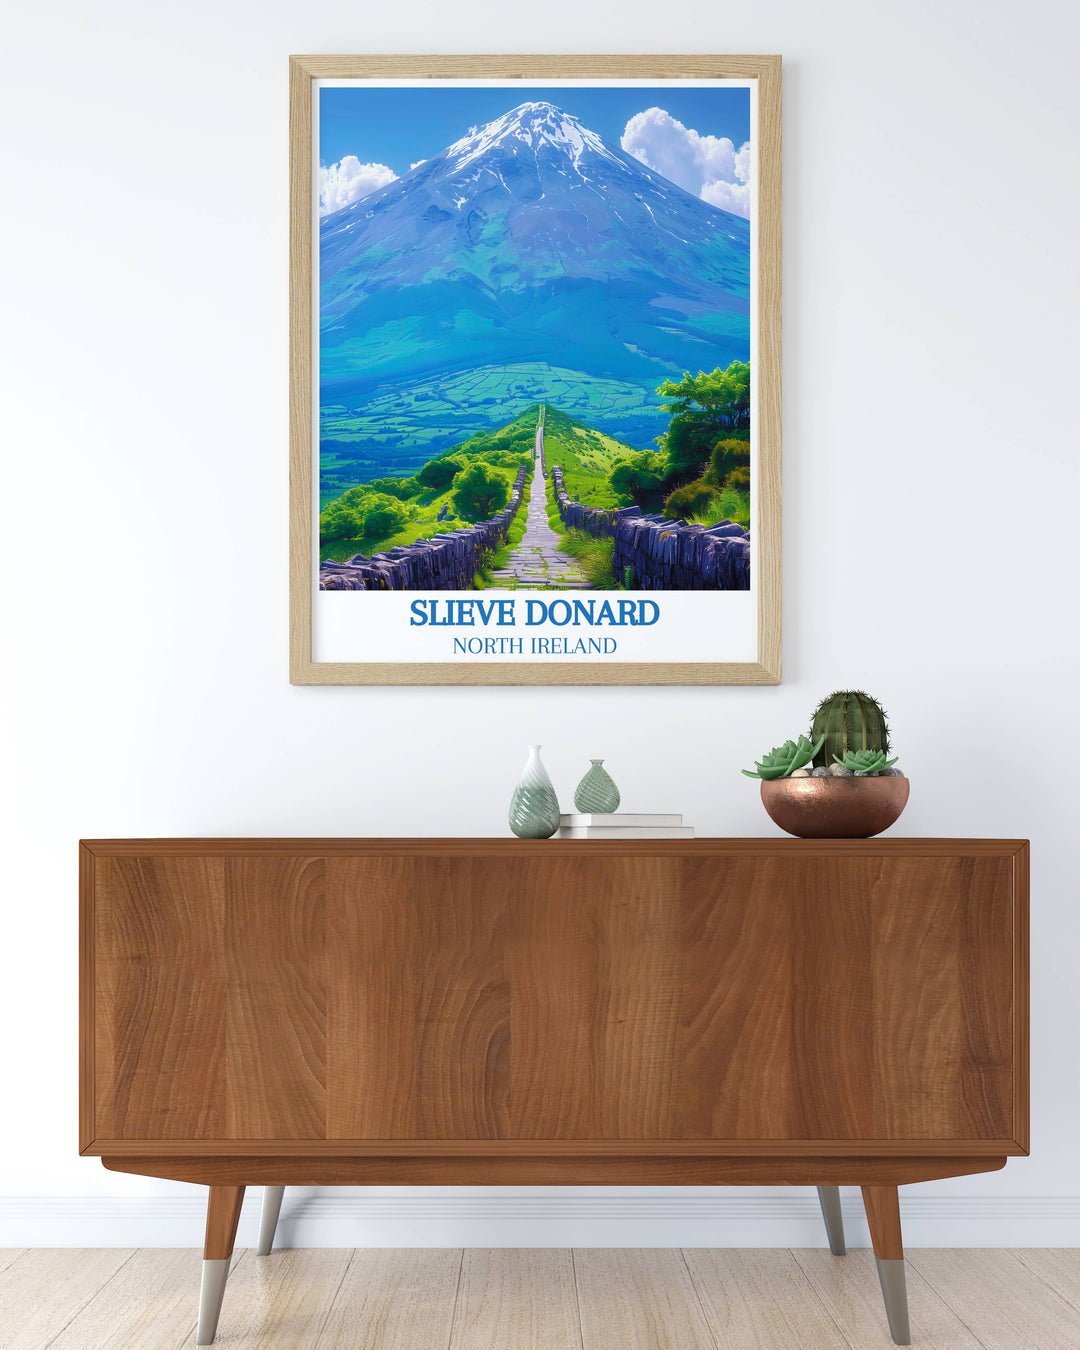 Customizable print of the Mourne Wall, offering a unique touch to your home decor with a personal connection to Northern Ireland.